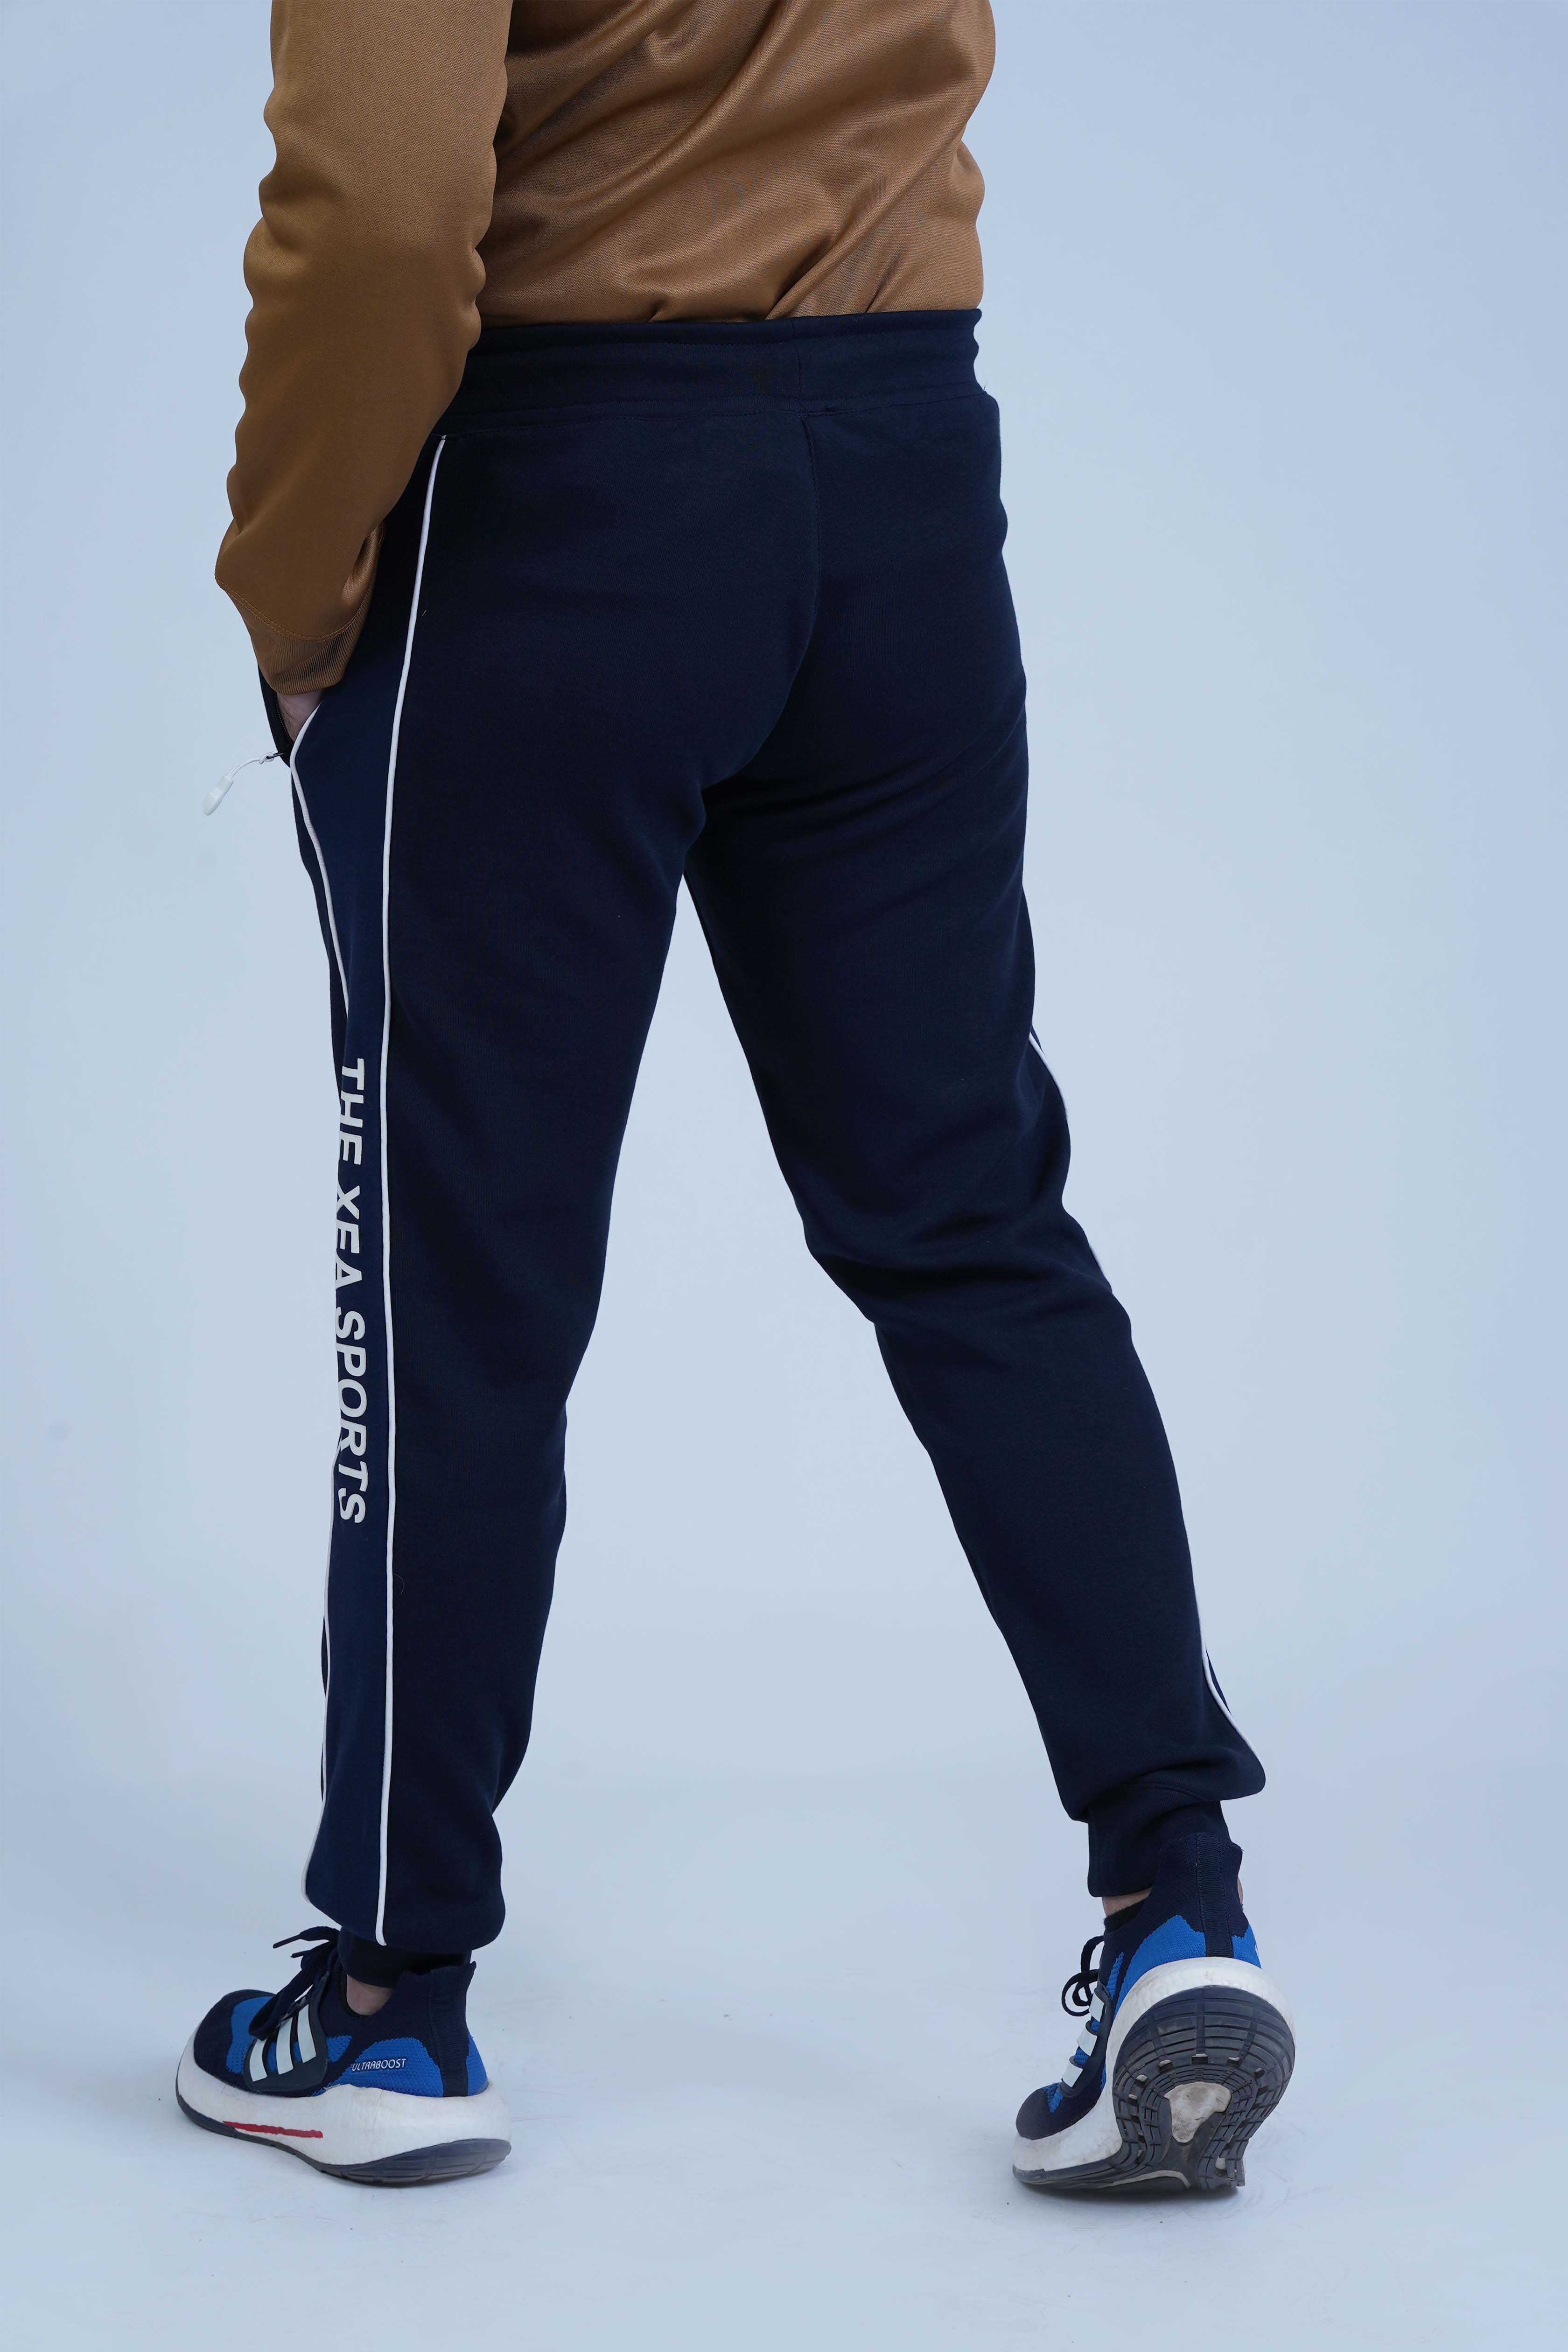 The Xea Men's Clothing - Solid Blue Sports Trouser for Men's